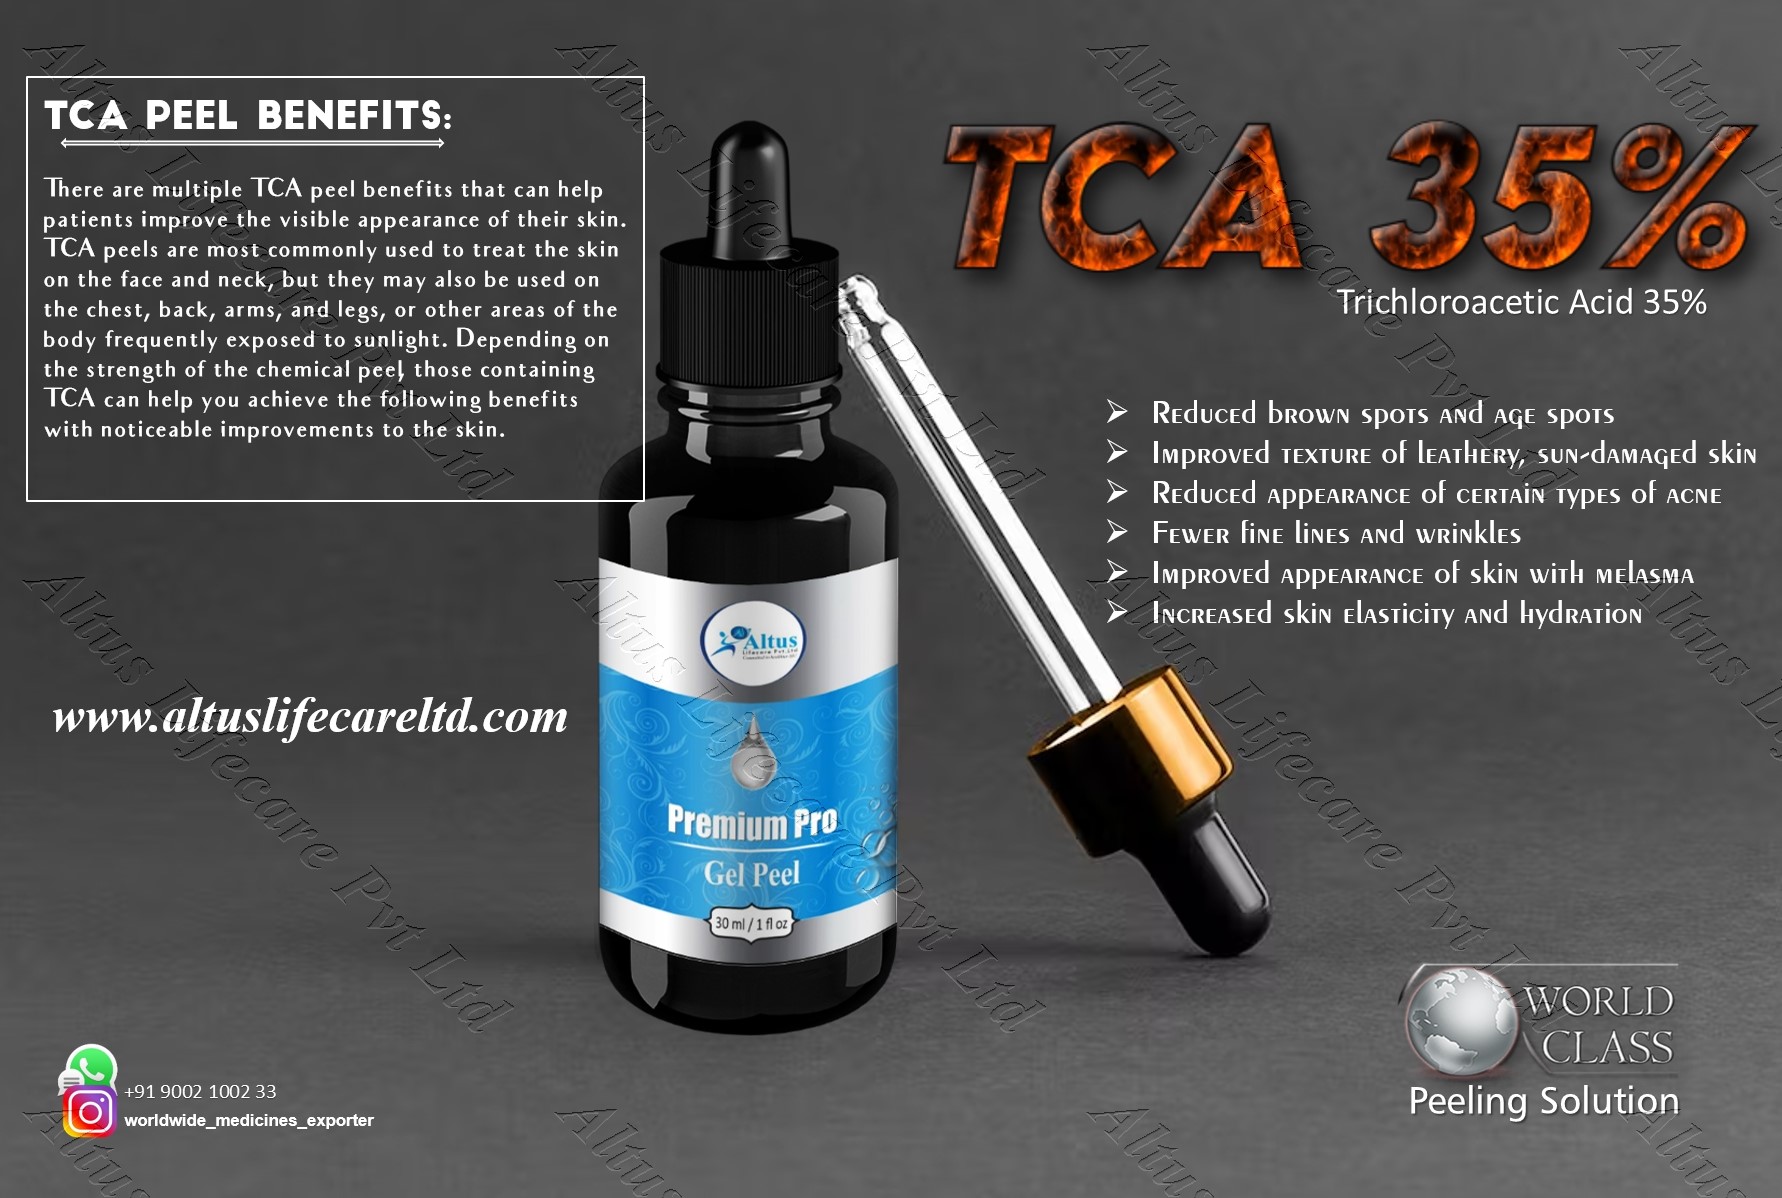 TCA 35% Skin Chemical Face Facial Peel | Treat Fine Lines | Scarring and Wrinkles